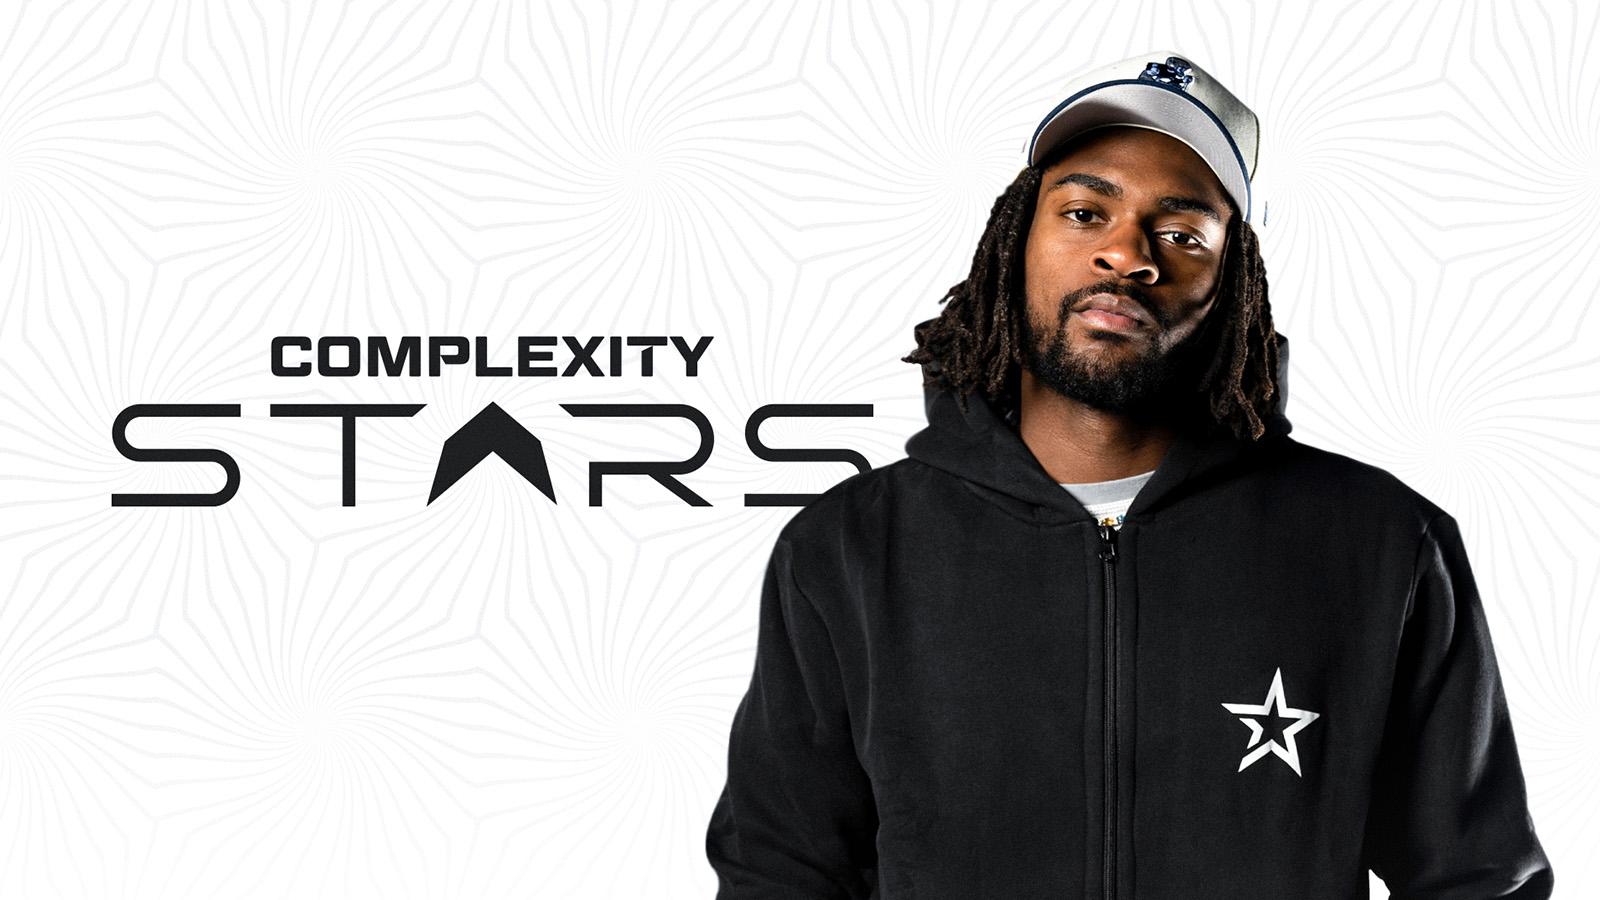 Trevon Diggs signs to Complexity